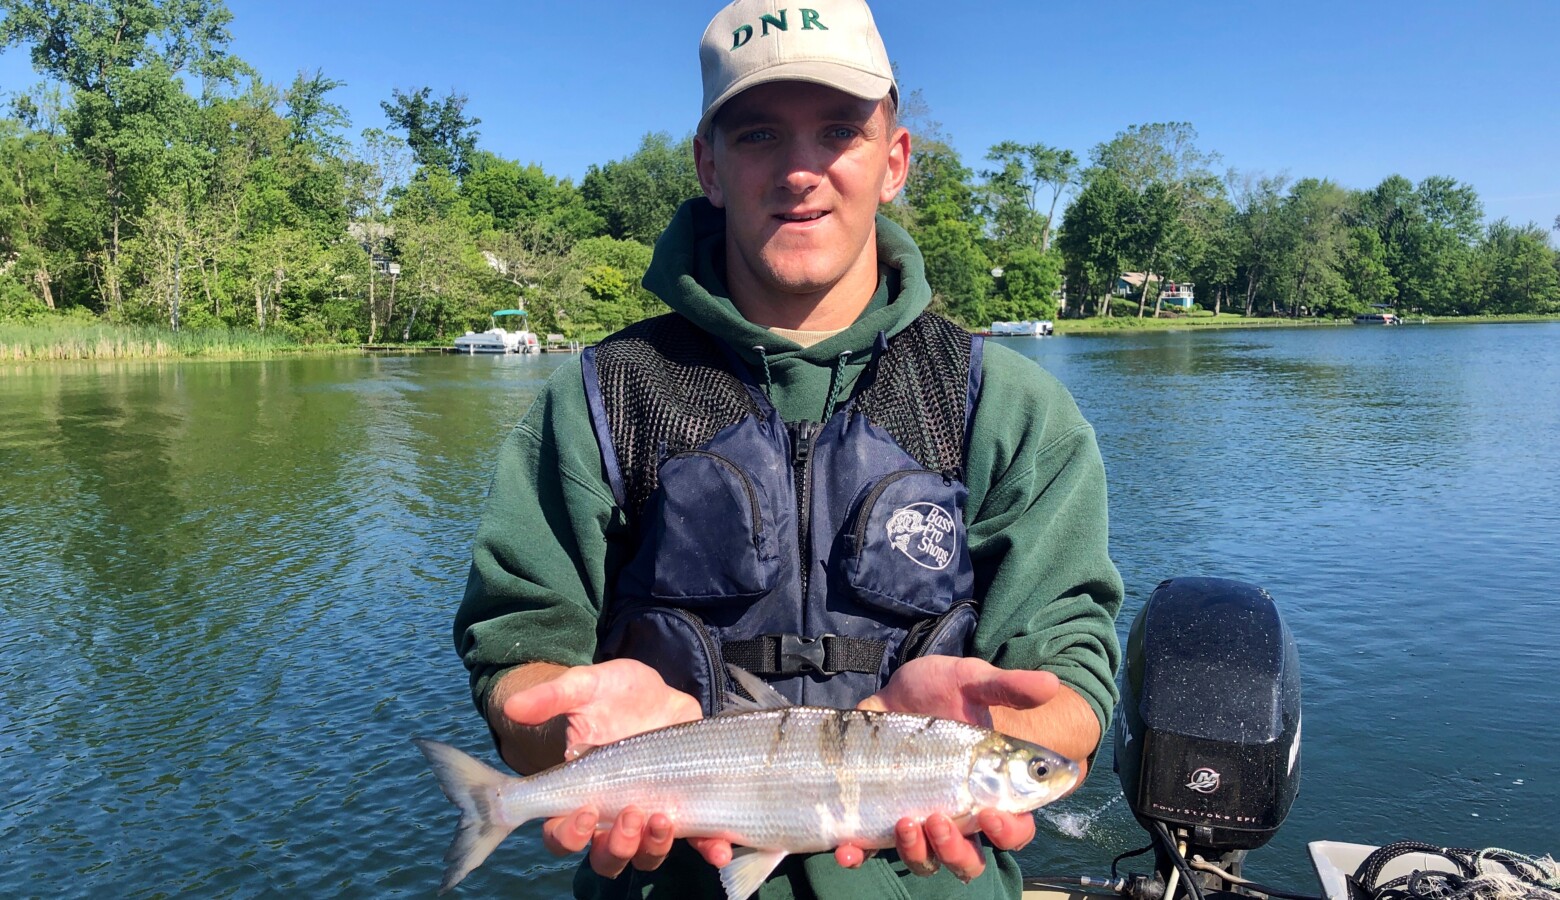 DNR Division of Fish &Wildlife fisheries aide Aaron Voirol holds a cisco captured at Crooked Lake during a 2019 fish community survey. (Courtesy of Indiana DNR)